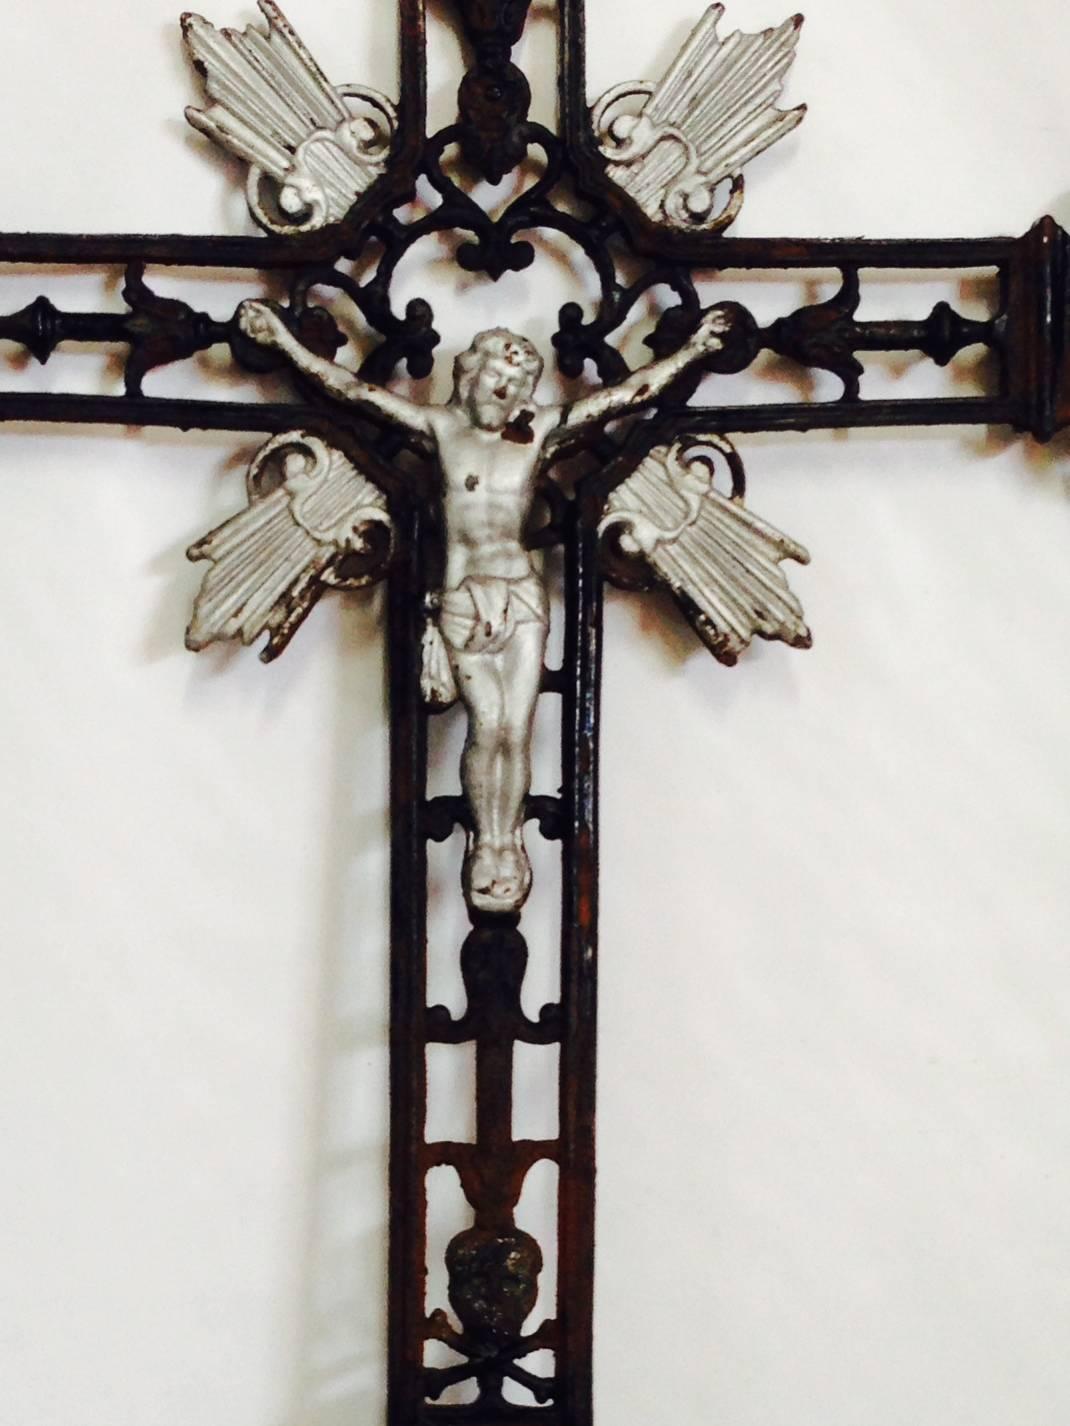 Early 20th Century 5" foot tall heavy painted cast iron crucifix grave marker. Silver leaf detail. Art Deco in style with figural Jesus and skull & cross bone detail.